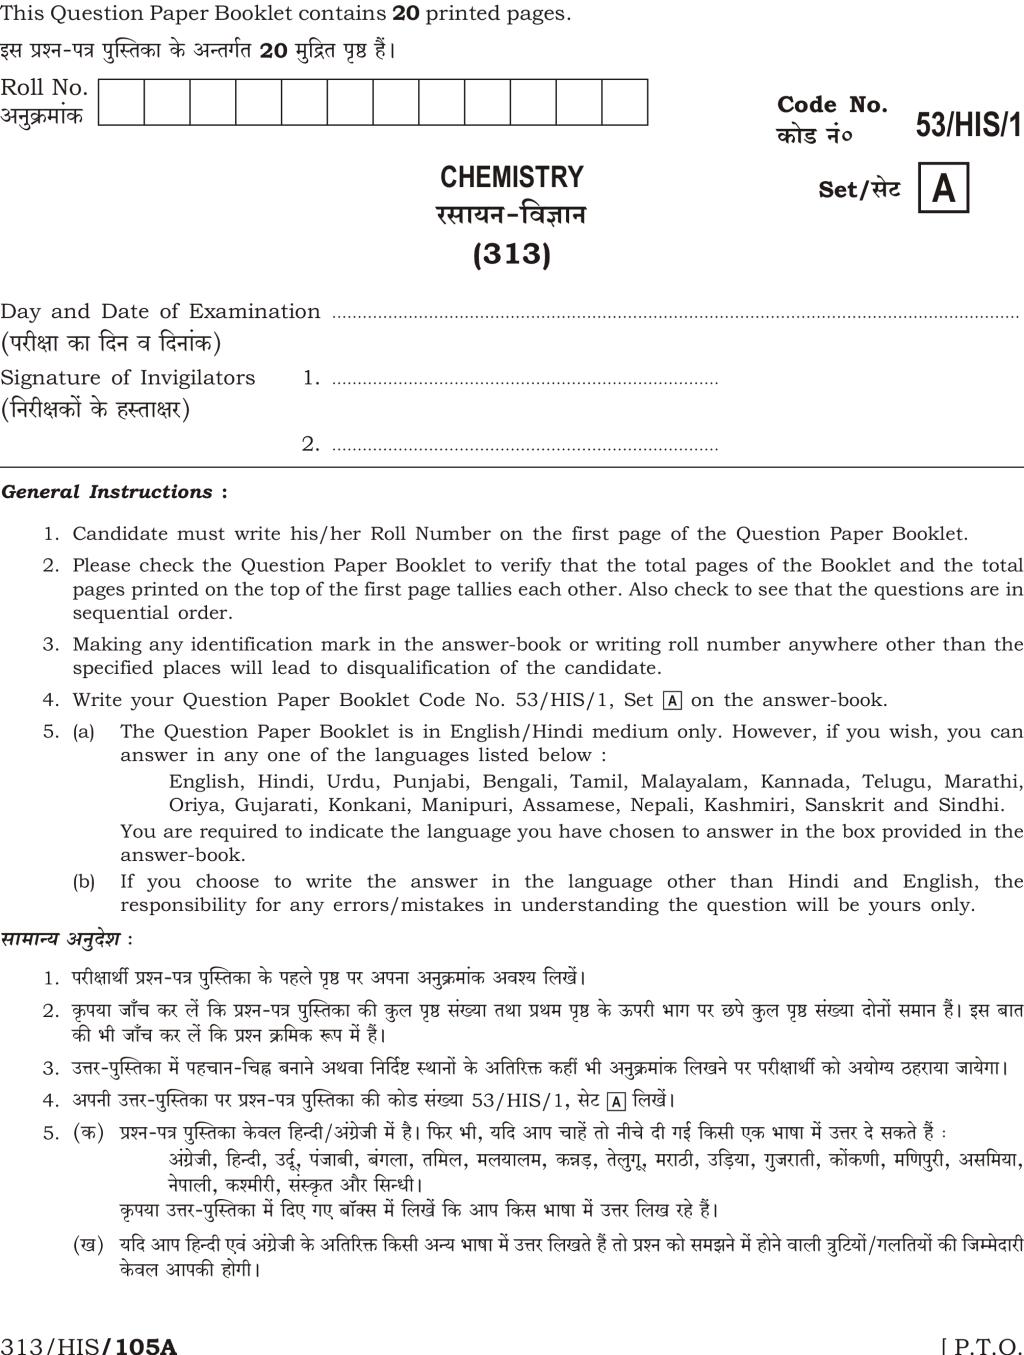 NIOS Class 12 Question Paper Oct 2016 - Chemistry - Page 1